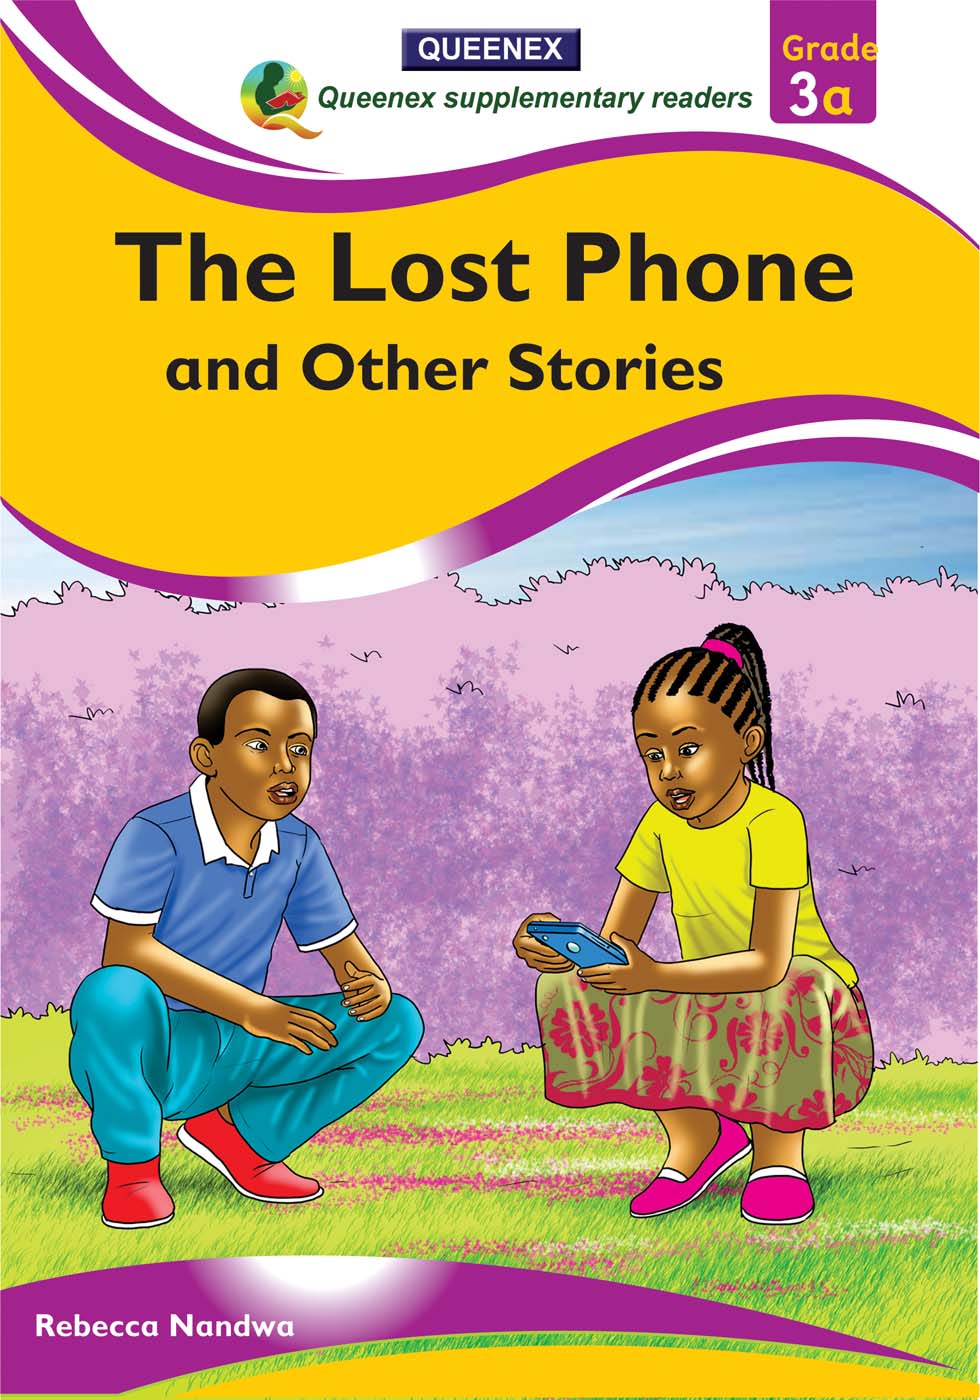 The Lost Phone and Other Stories